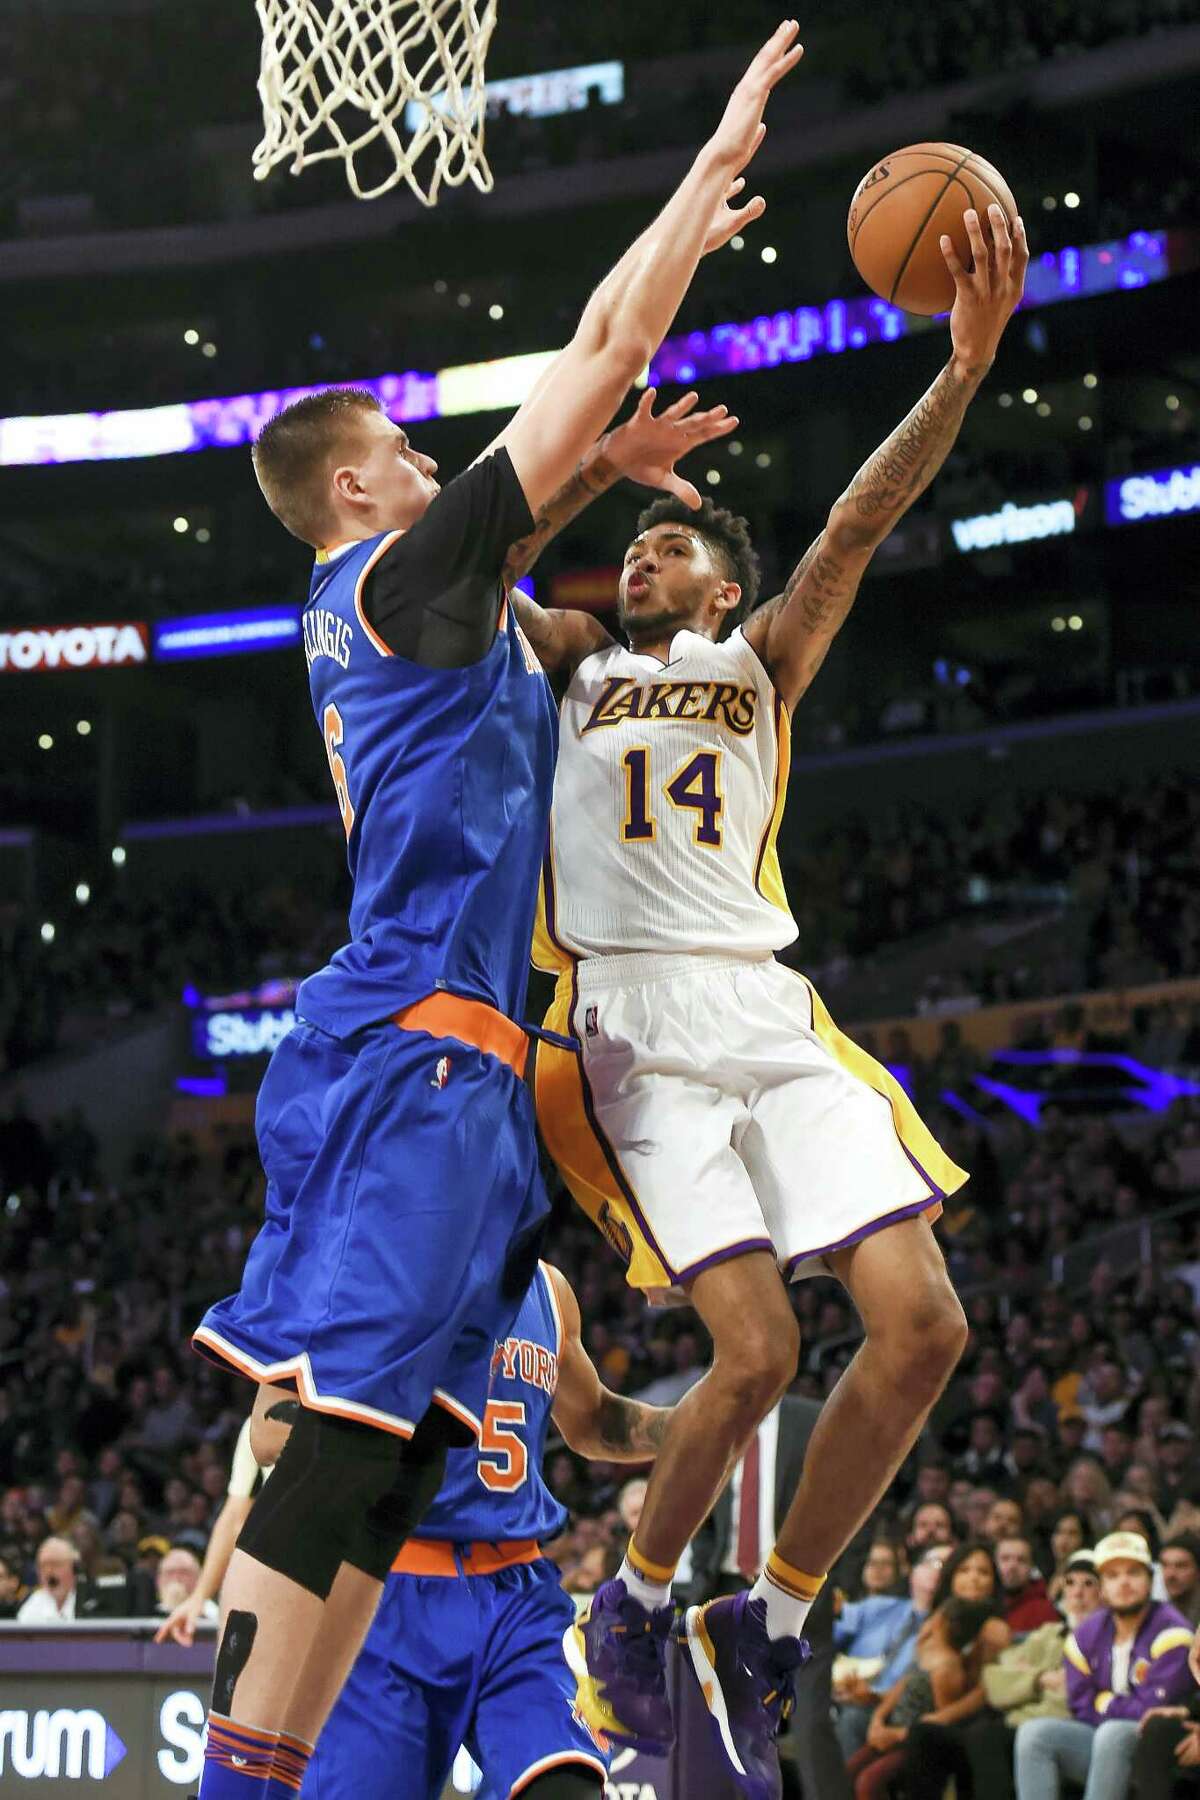 Los Angeles Lakers forward Brandon Ingram (14) battles New York Knicks forward Kristaps Porzingis (6), of Latvia, as he drives to the basket during the second half of an NBA basketball game on Sunday, Dec. 11, 2016 in Los Angeles. The Knicks win 118-112.